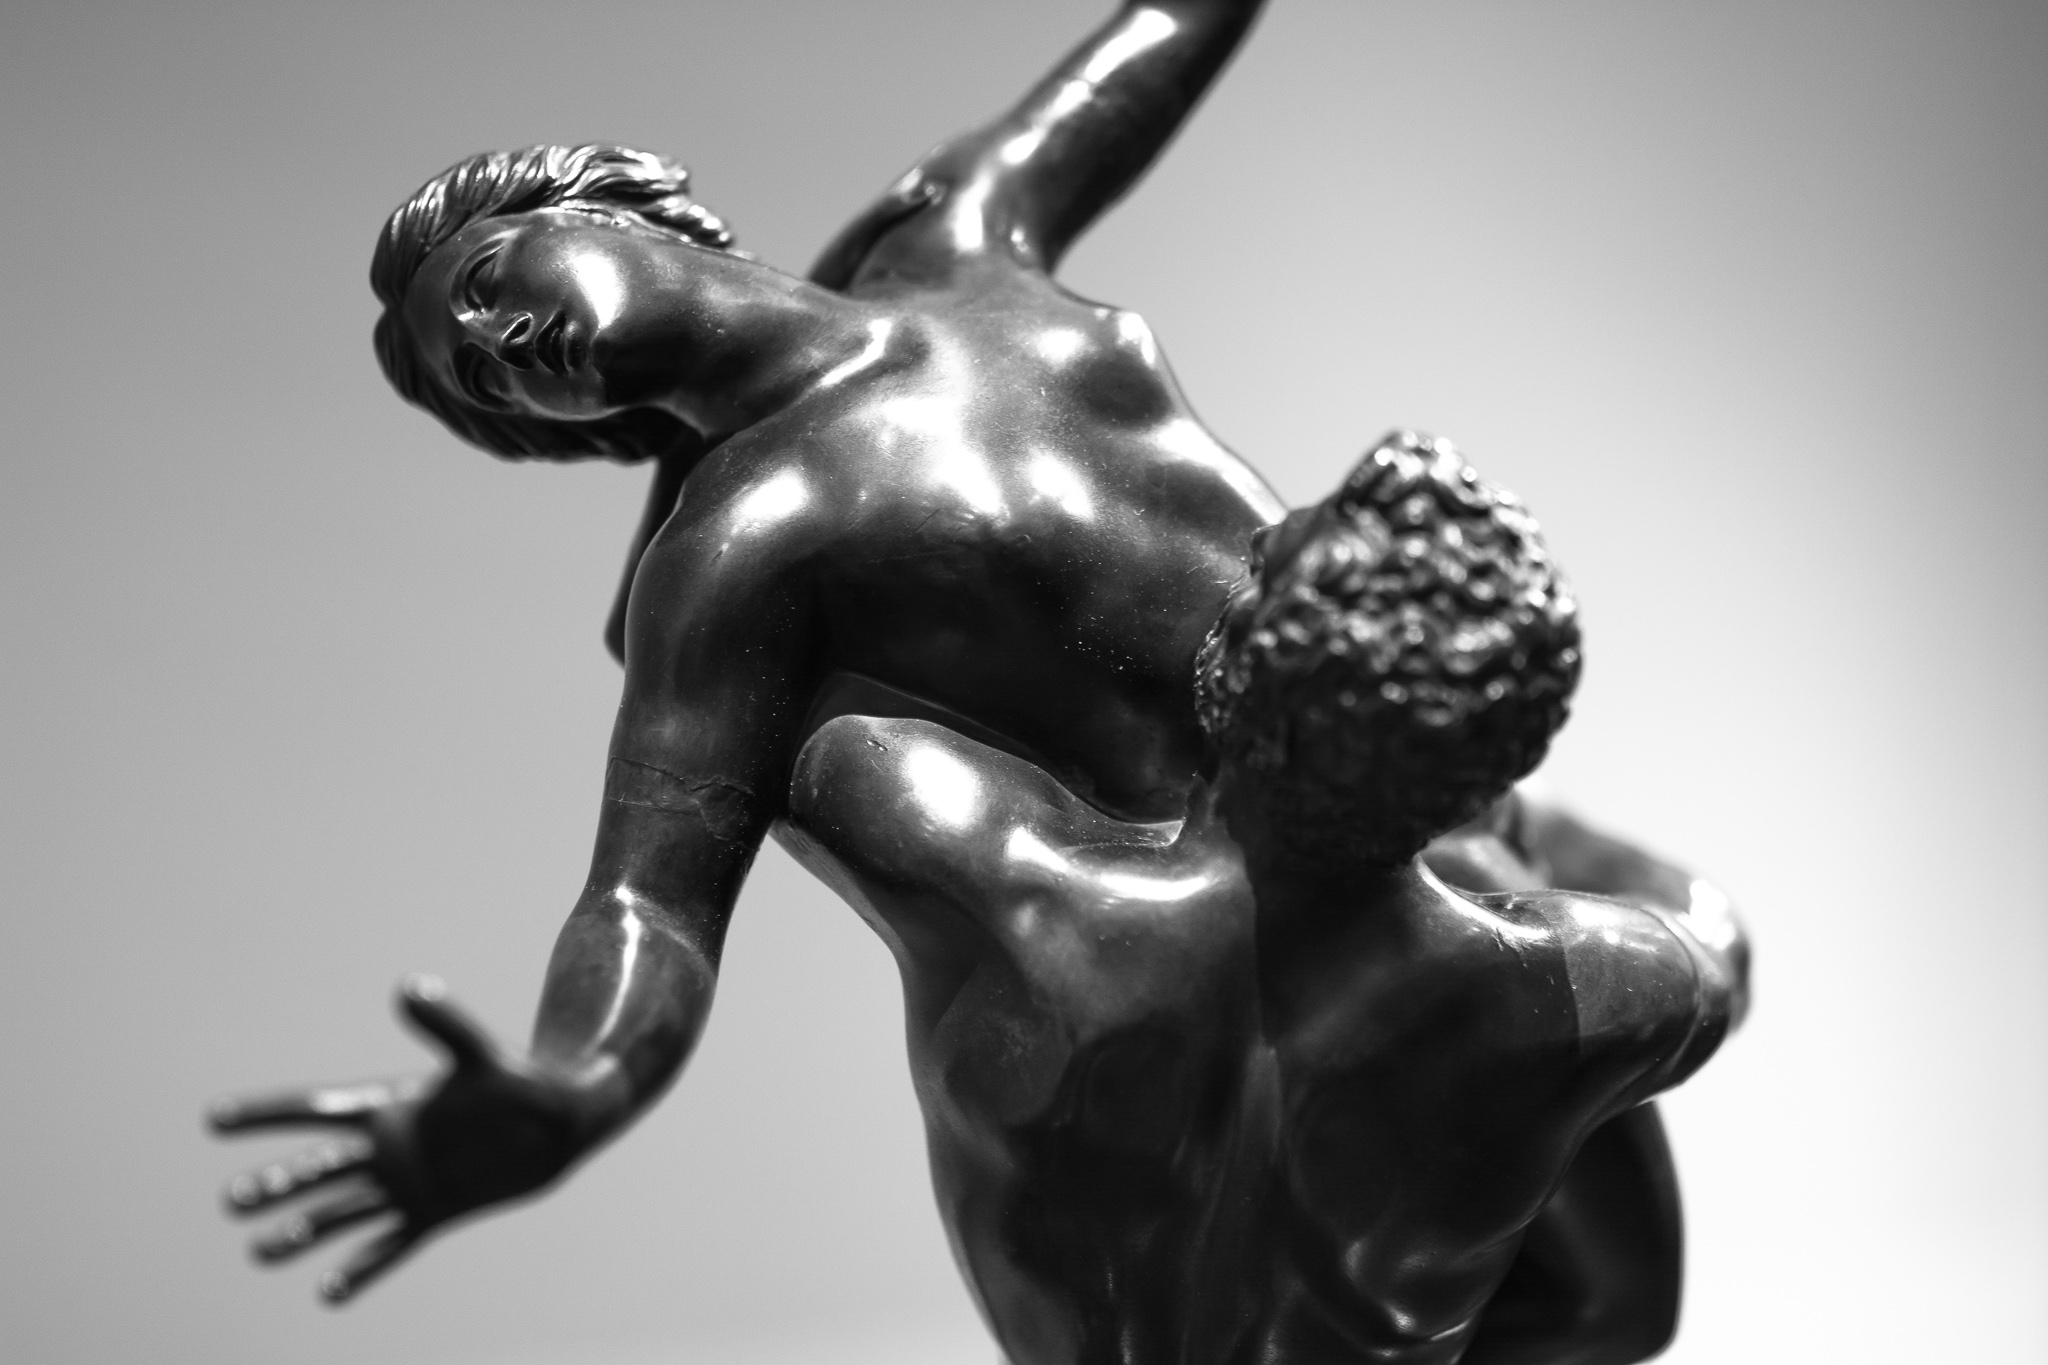 Bronze replica of Giambologna's sculpture, 'The Rape of the Sabina Women', originally carved in white marble approximately 4m high and located in Florence, Italy.<br> According to the legend, after Romulus has founded the city of Rome, women were sought among the people of the Sabines, who after opposing and trying to prevent it, were deceived and all their women were captured.